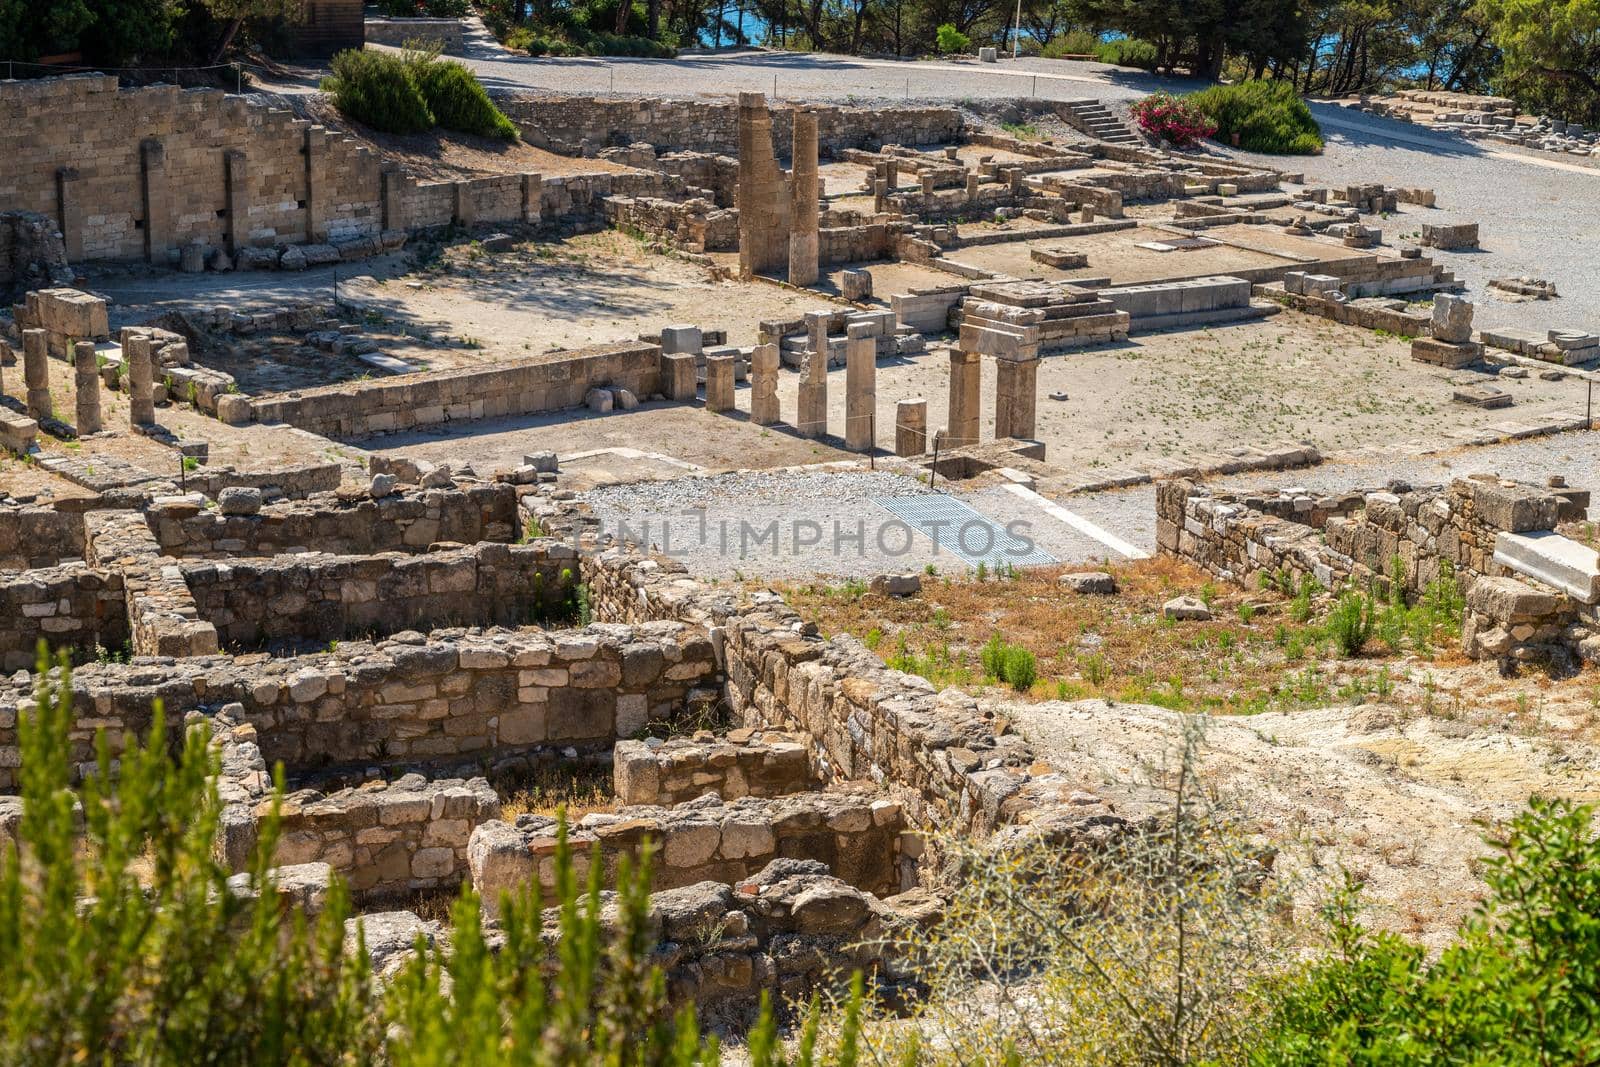 Excavation site of the ancient city of Kamiros at the westside of Rhodes island, Greece by reinerc